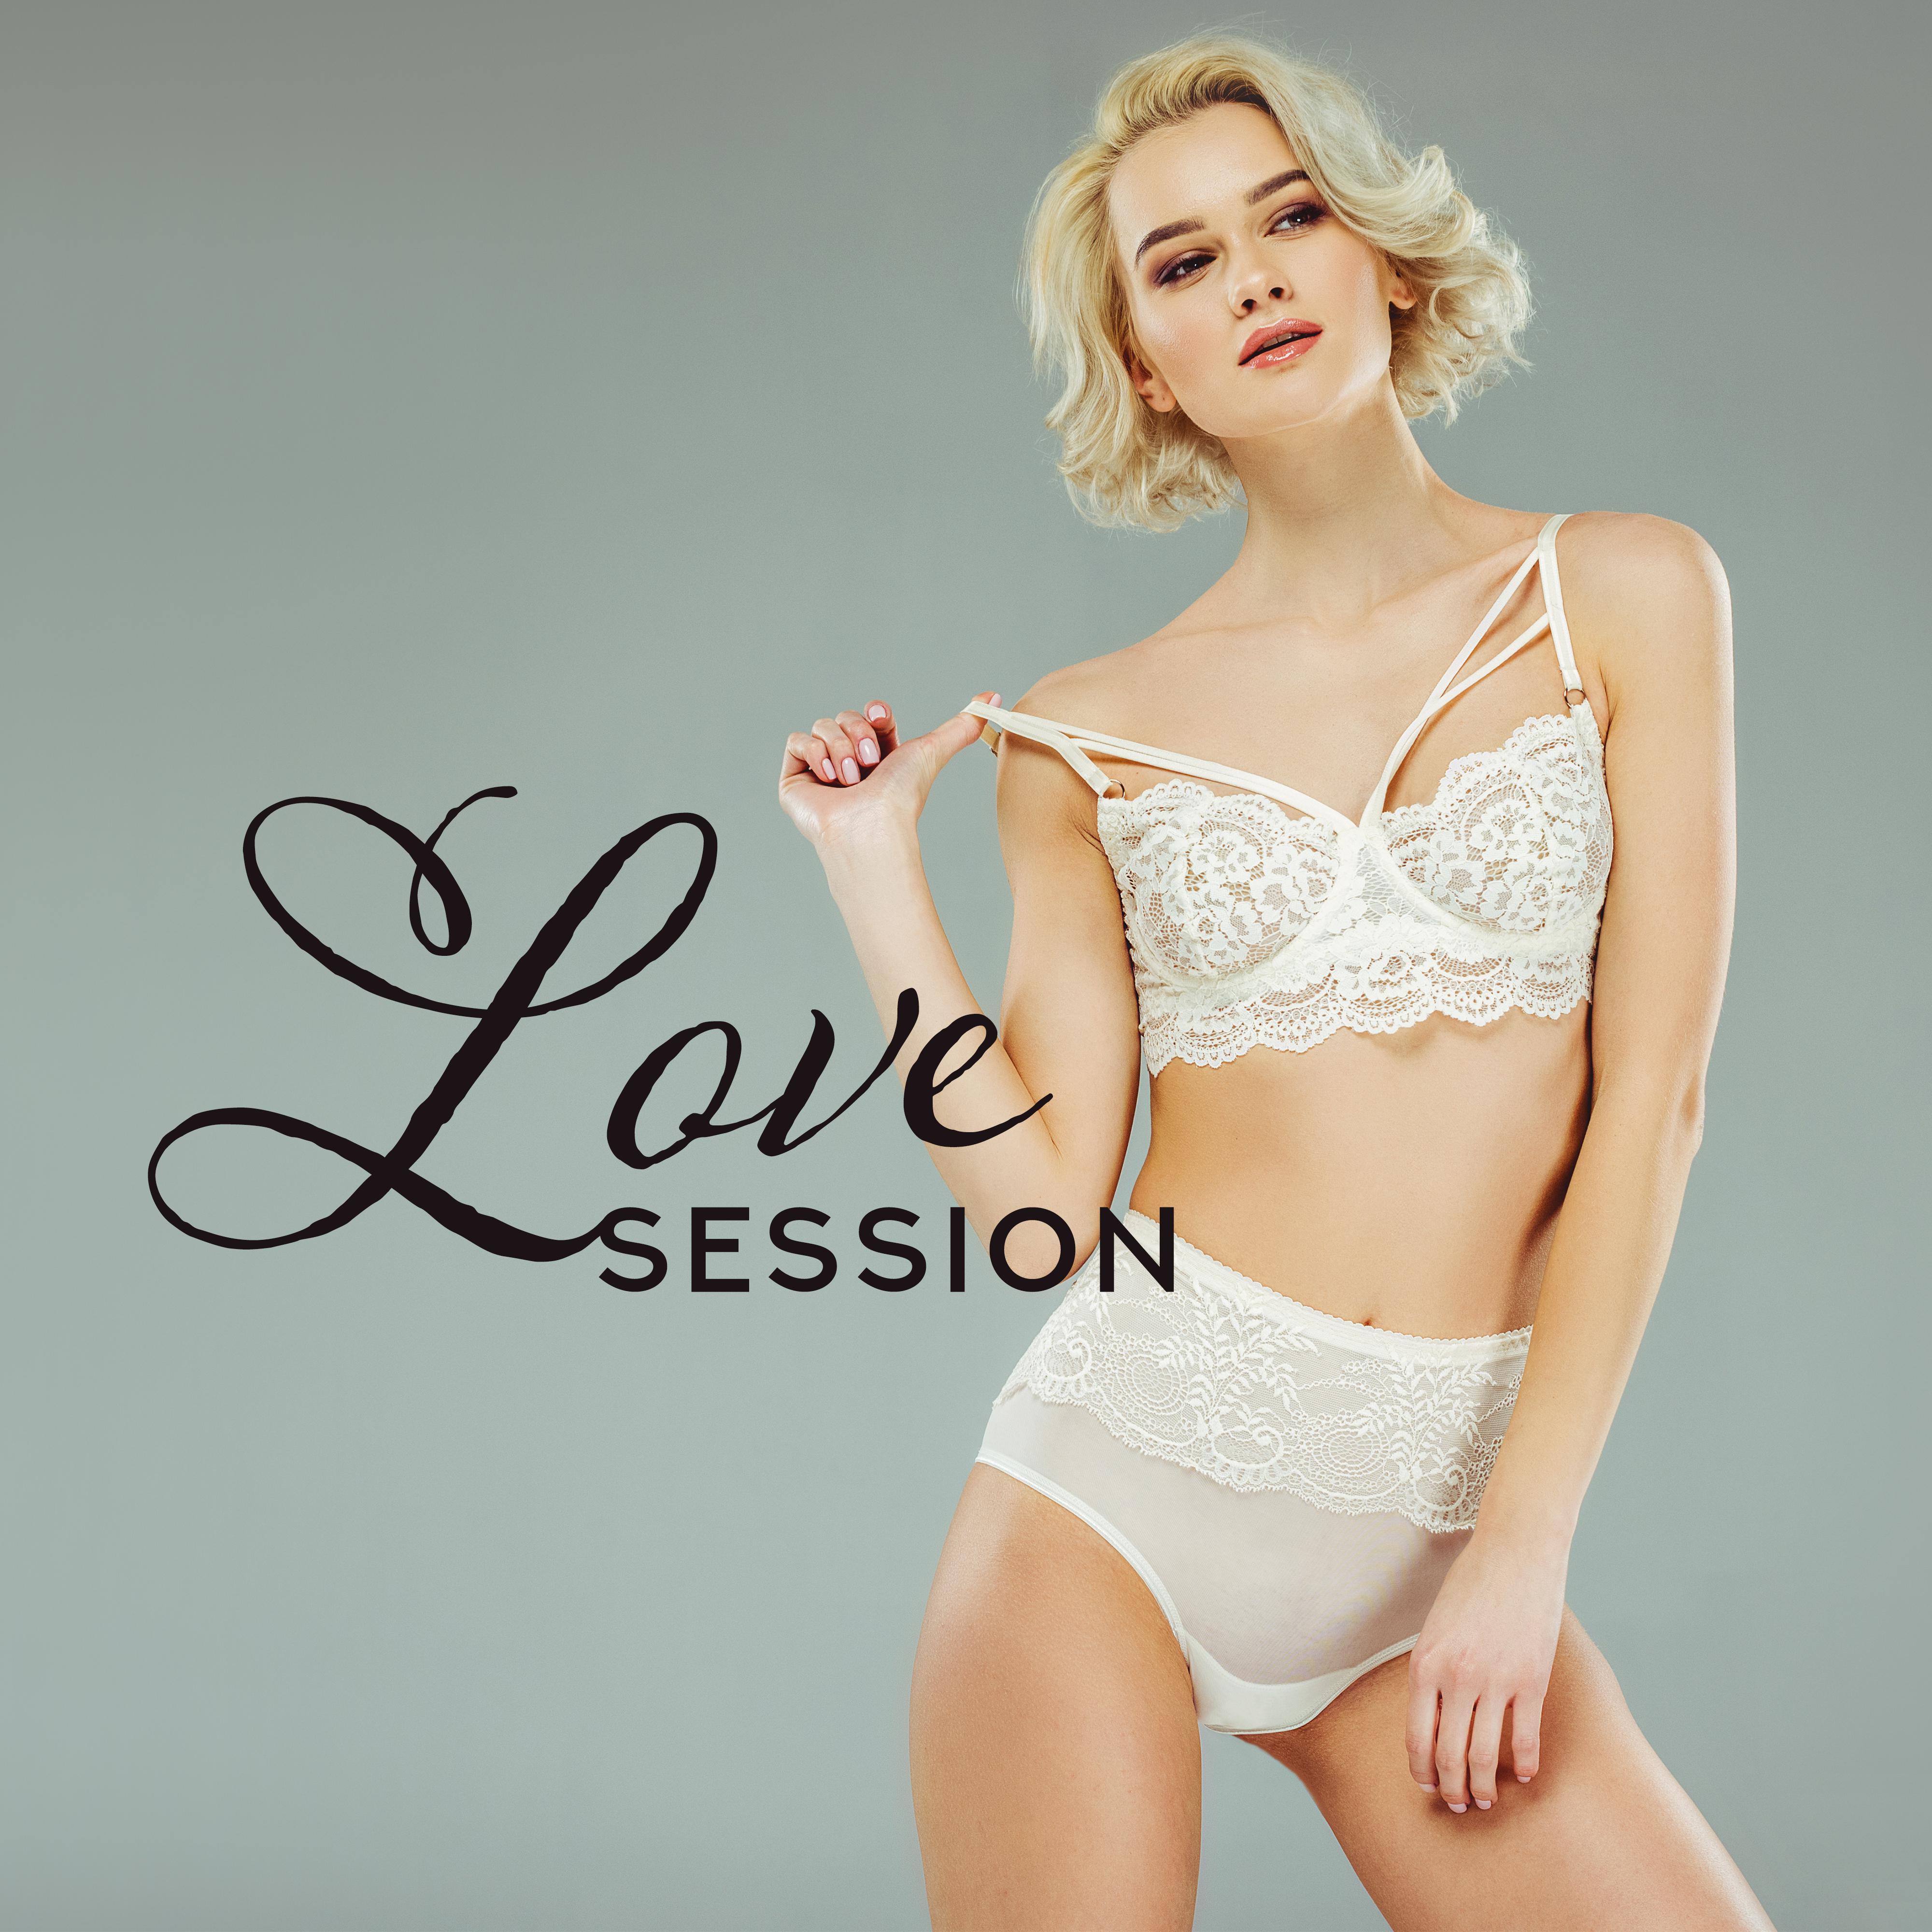 Love Session - 15 Dedicated Jazz Tracks for All Couples in Love